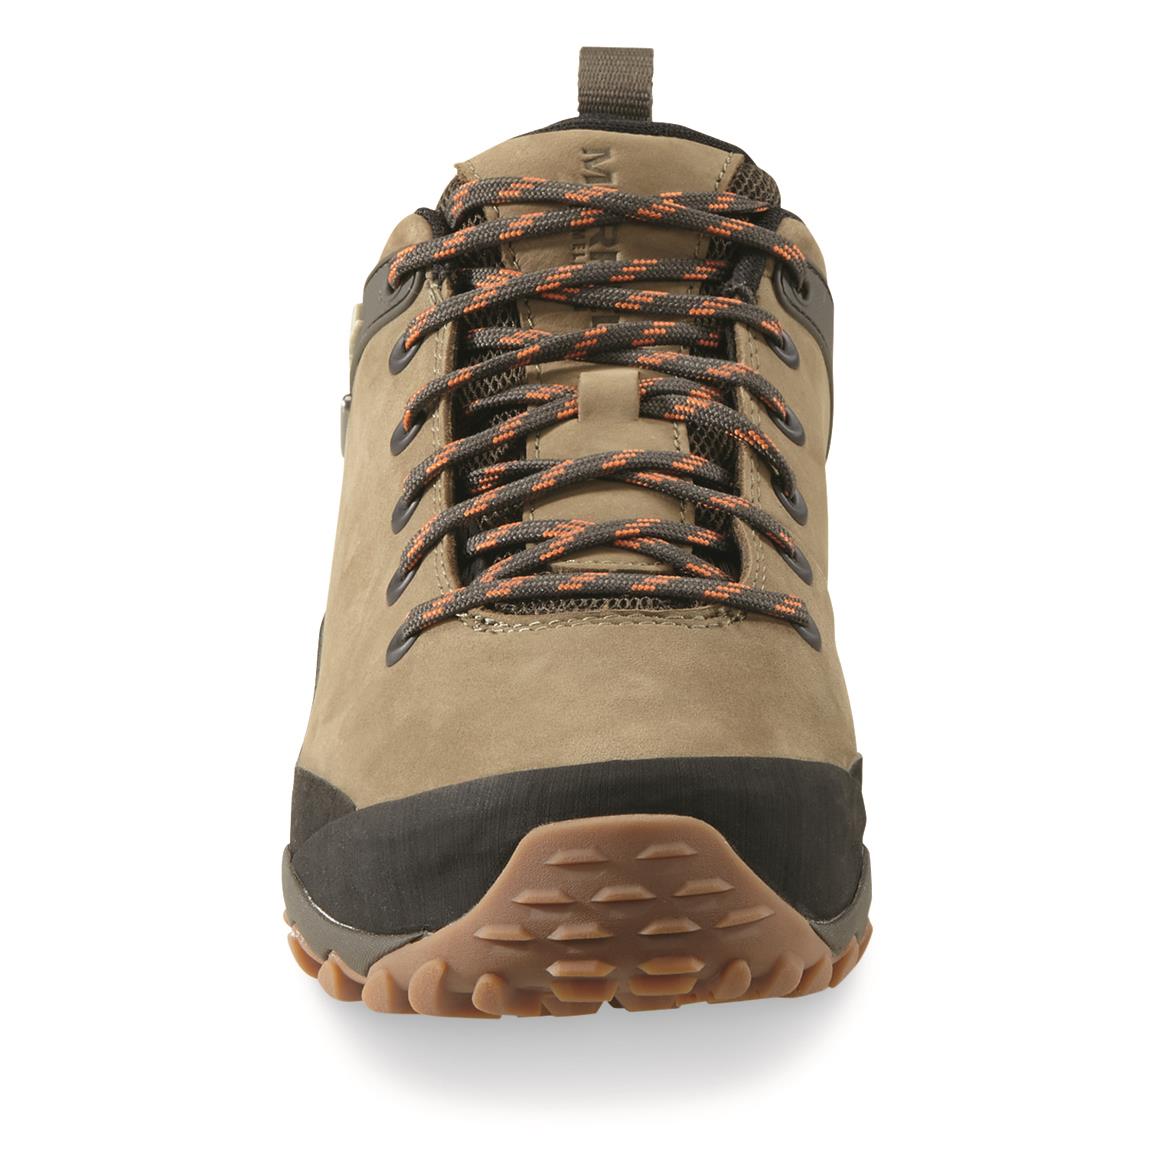 Merrell Men's Moab 2 Vent Hiking Shoes - 676001, Hiking Boots & Shoes ...